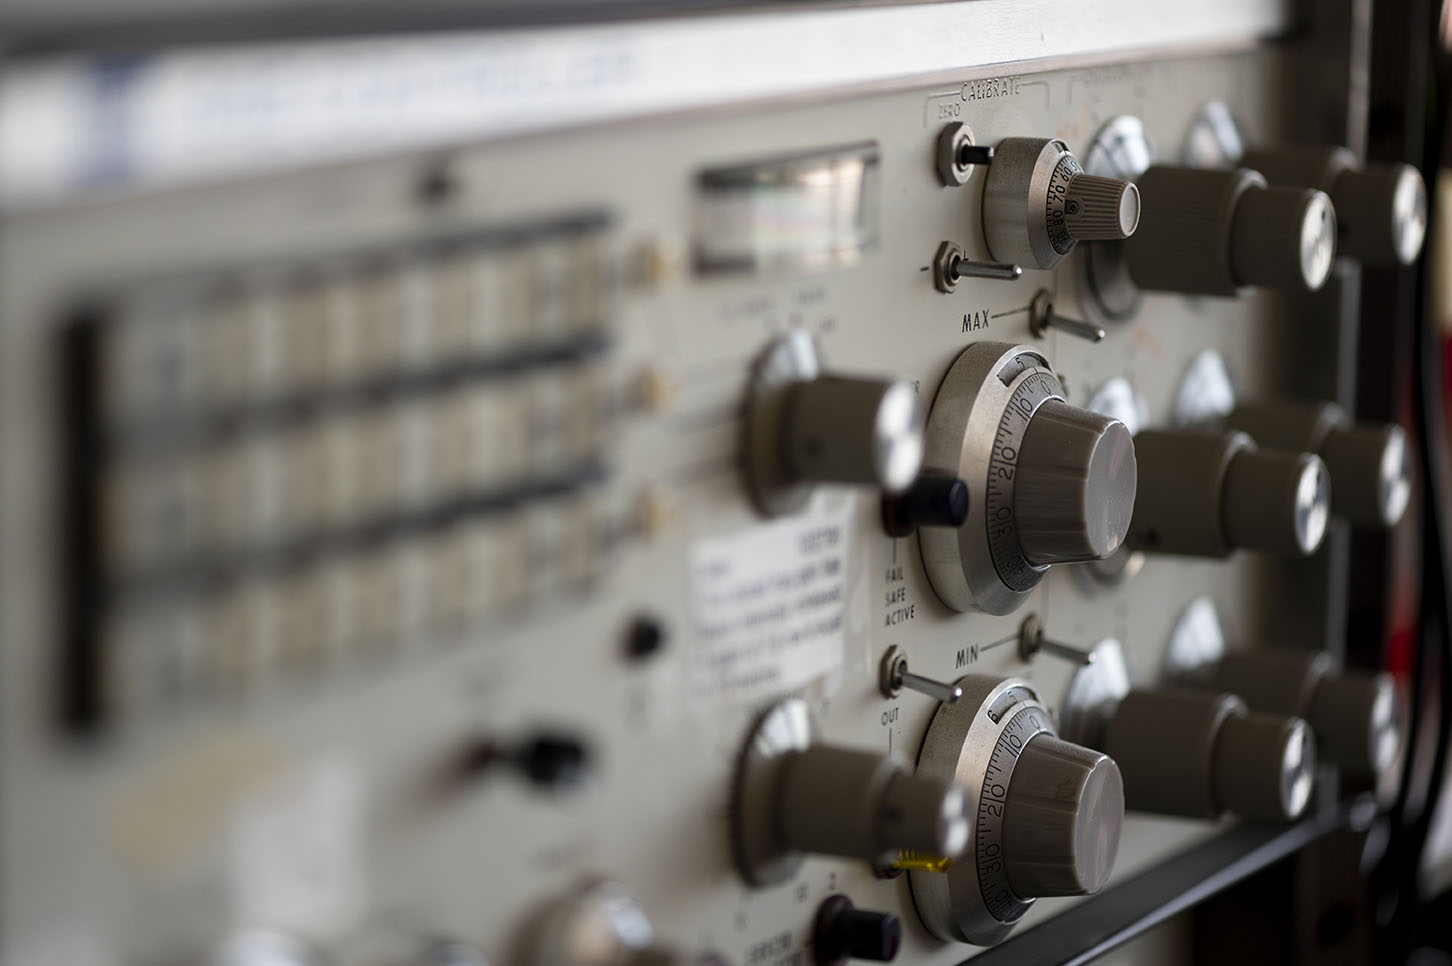 A picture of some equipment with many knobs and switches